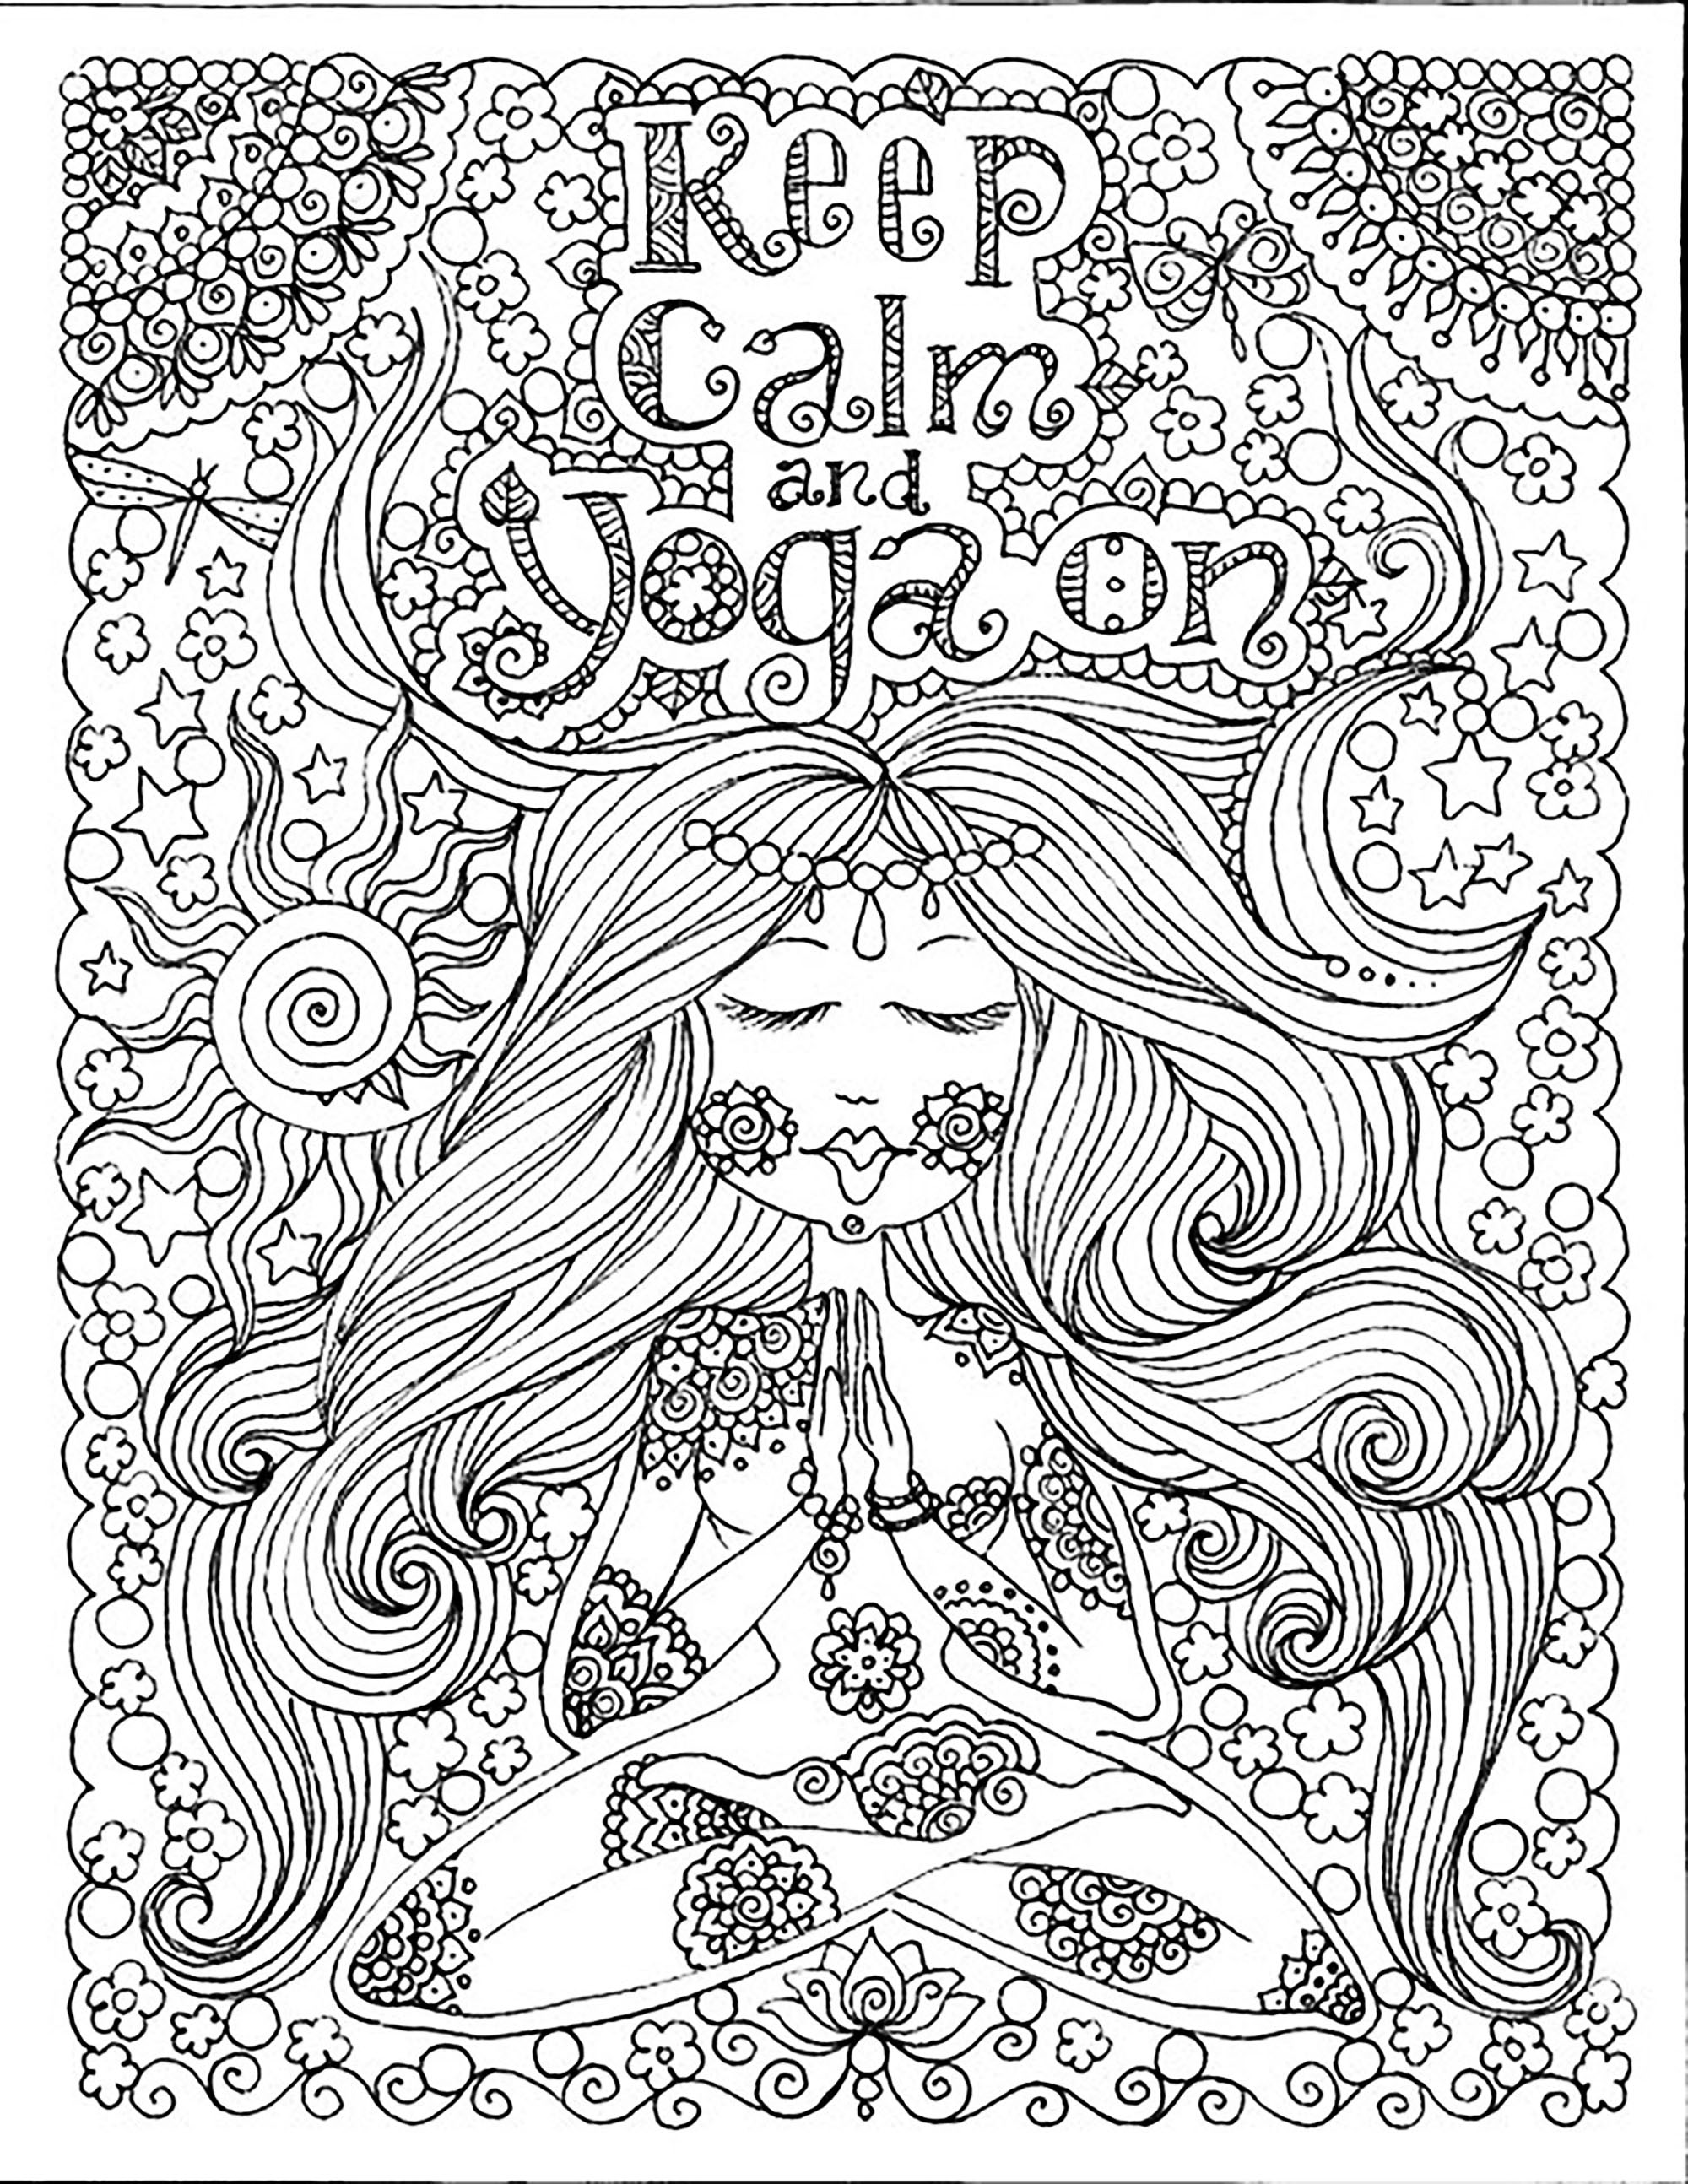 Soothe Your Mind to Ease Pain with Anxiety Coloring Pages!